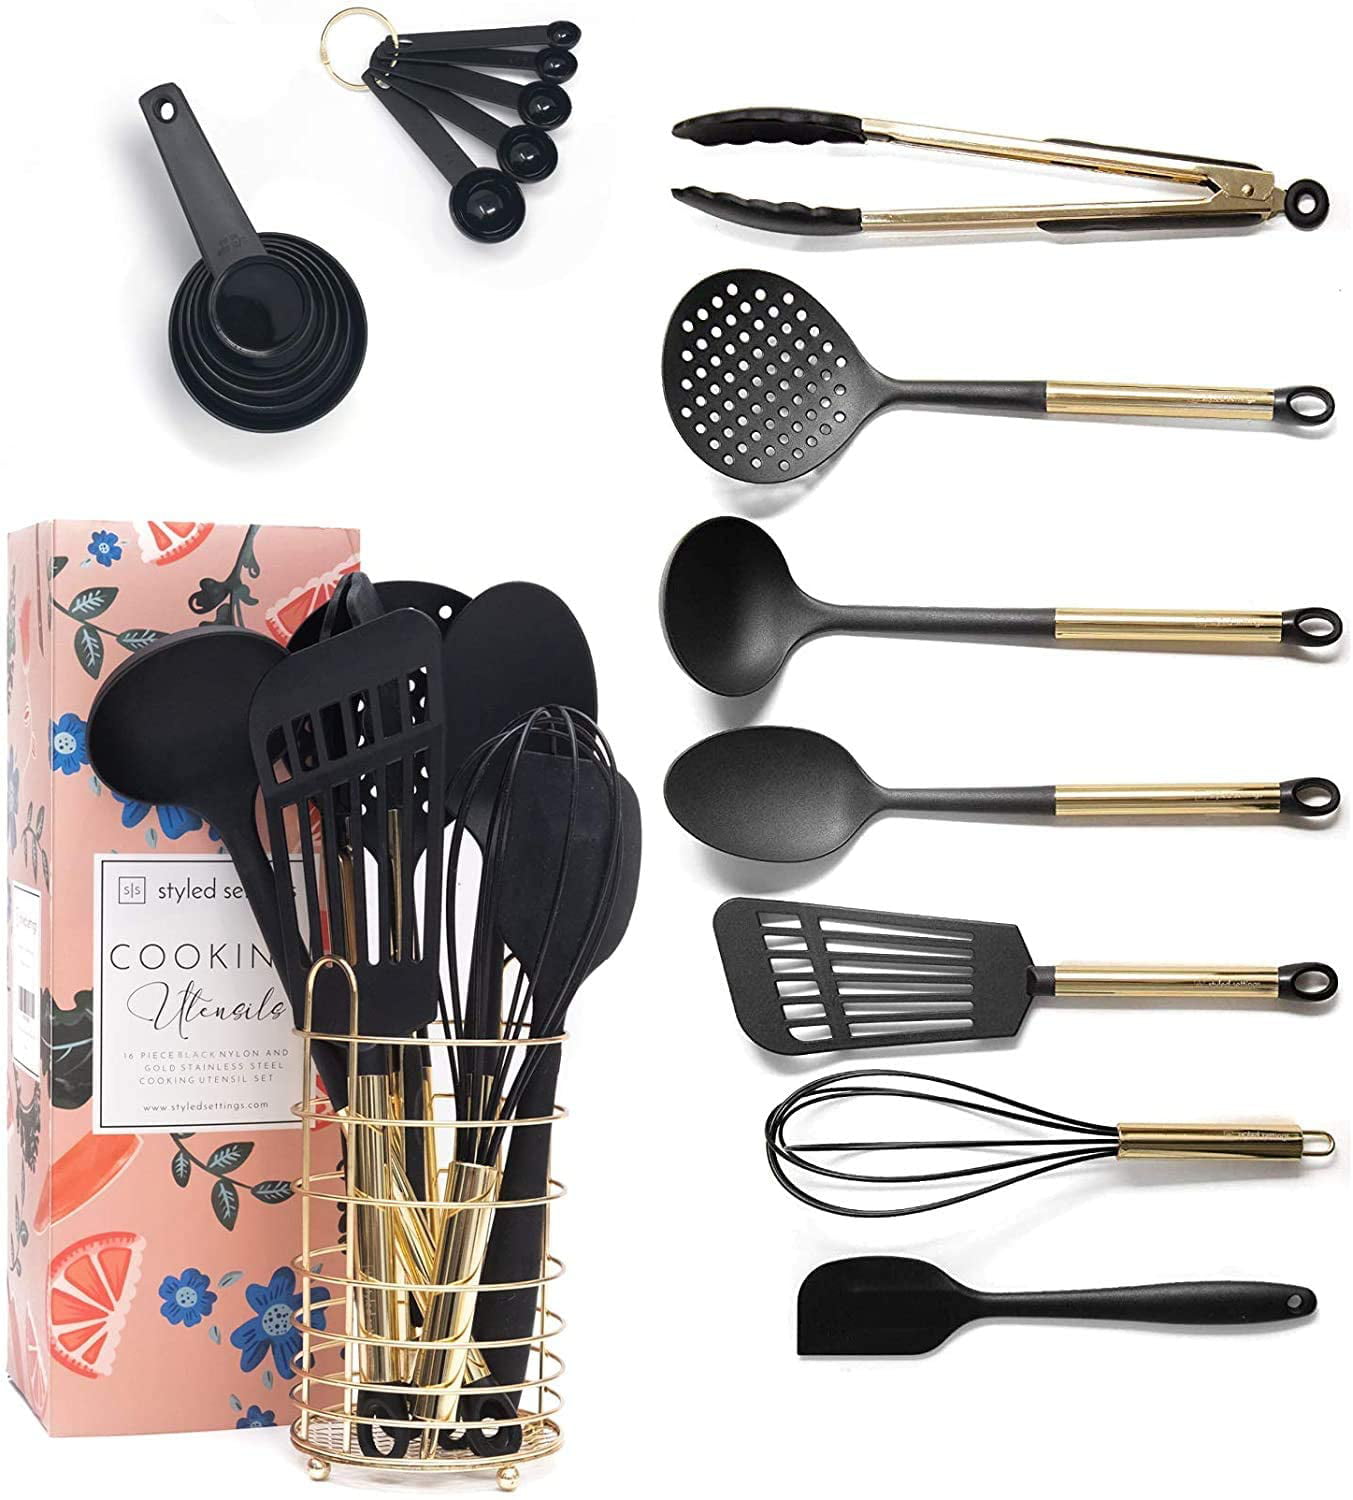 Black and Gold Cooking Utensils with Stainless Steel Gold Utensil Holder    25 Piece Kitchen Utensils Set with Holder Includes Black and Gold Measuring  ...